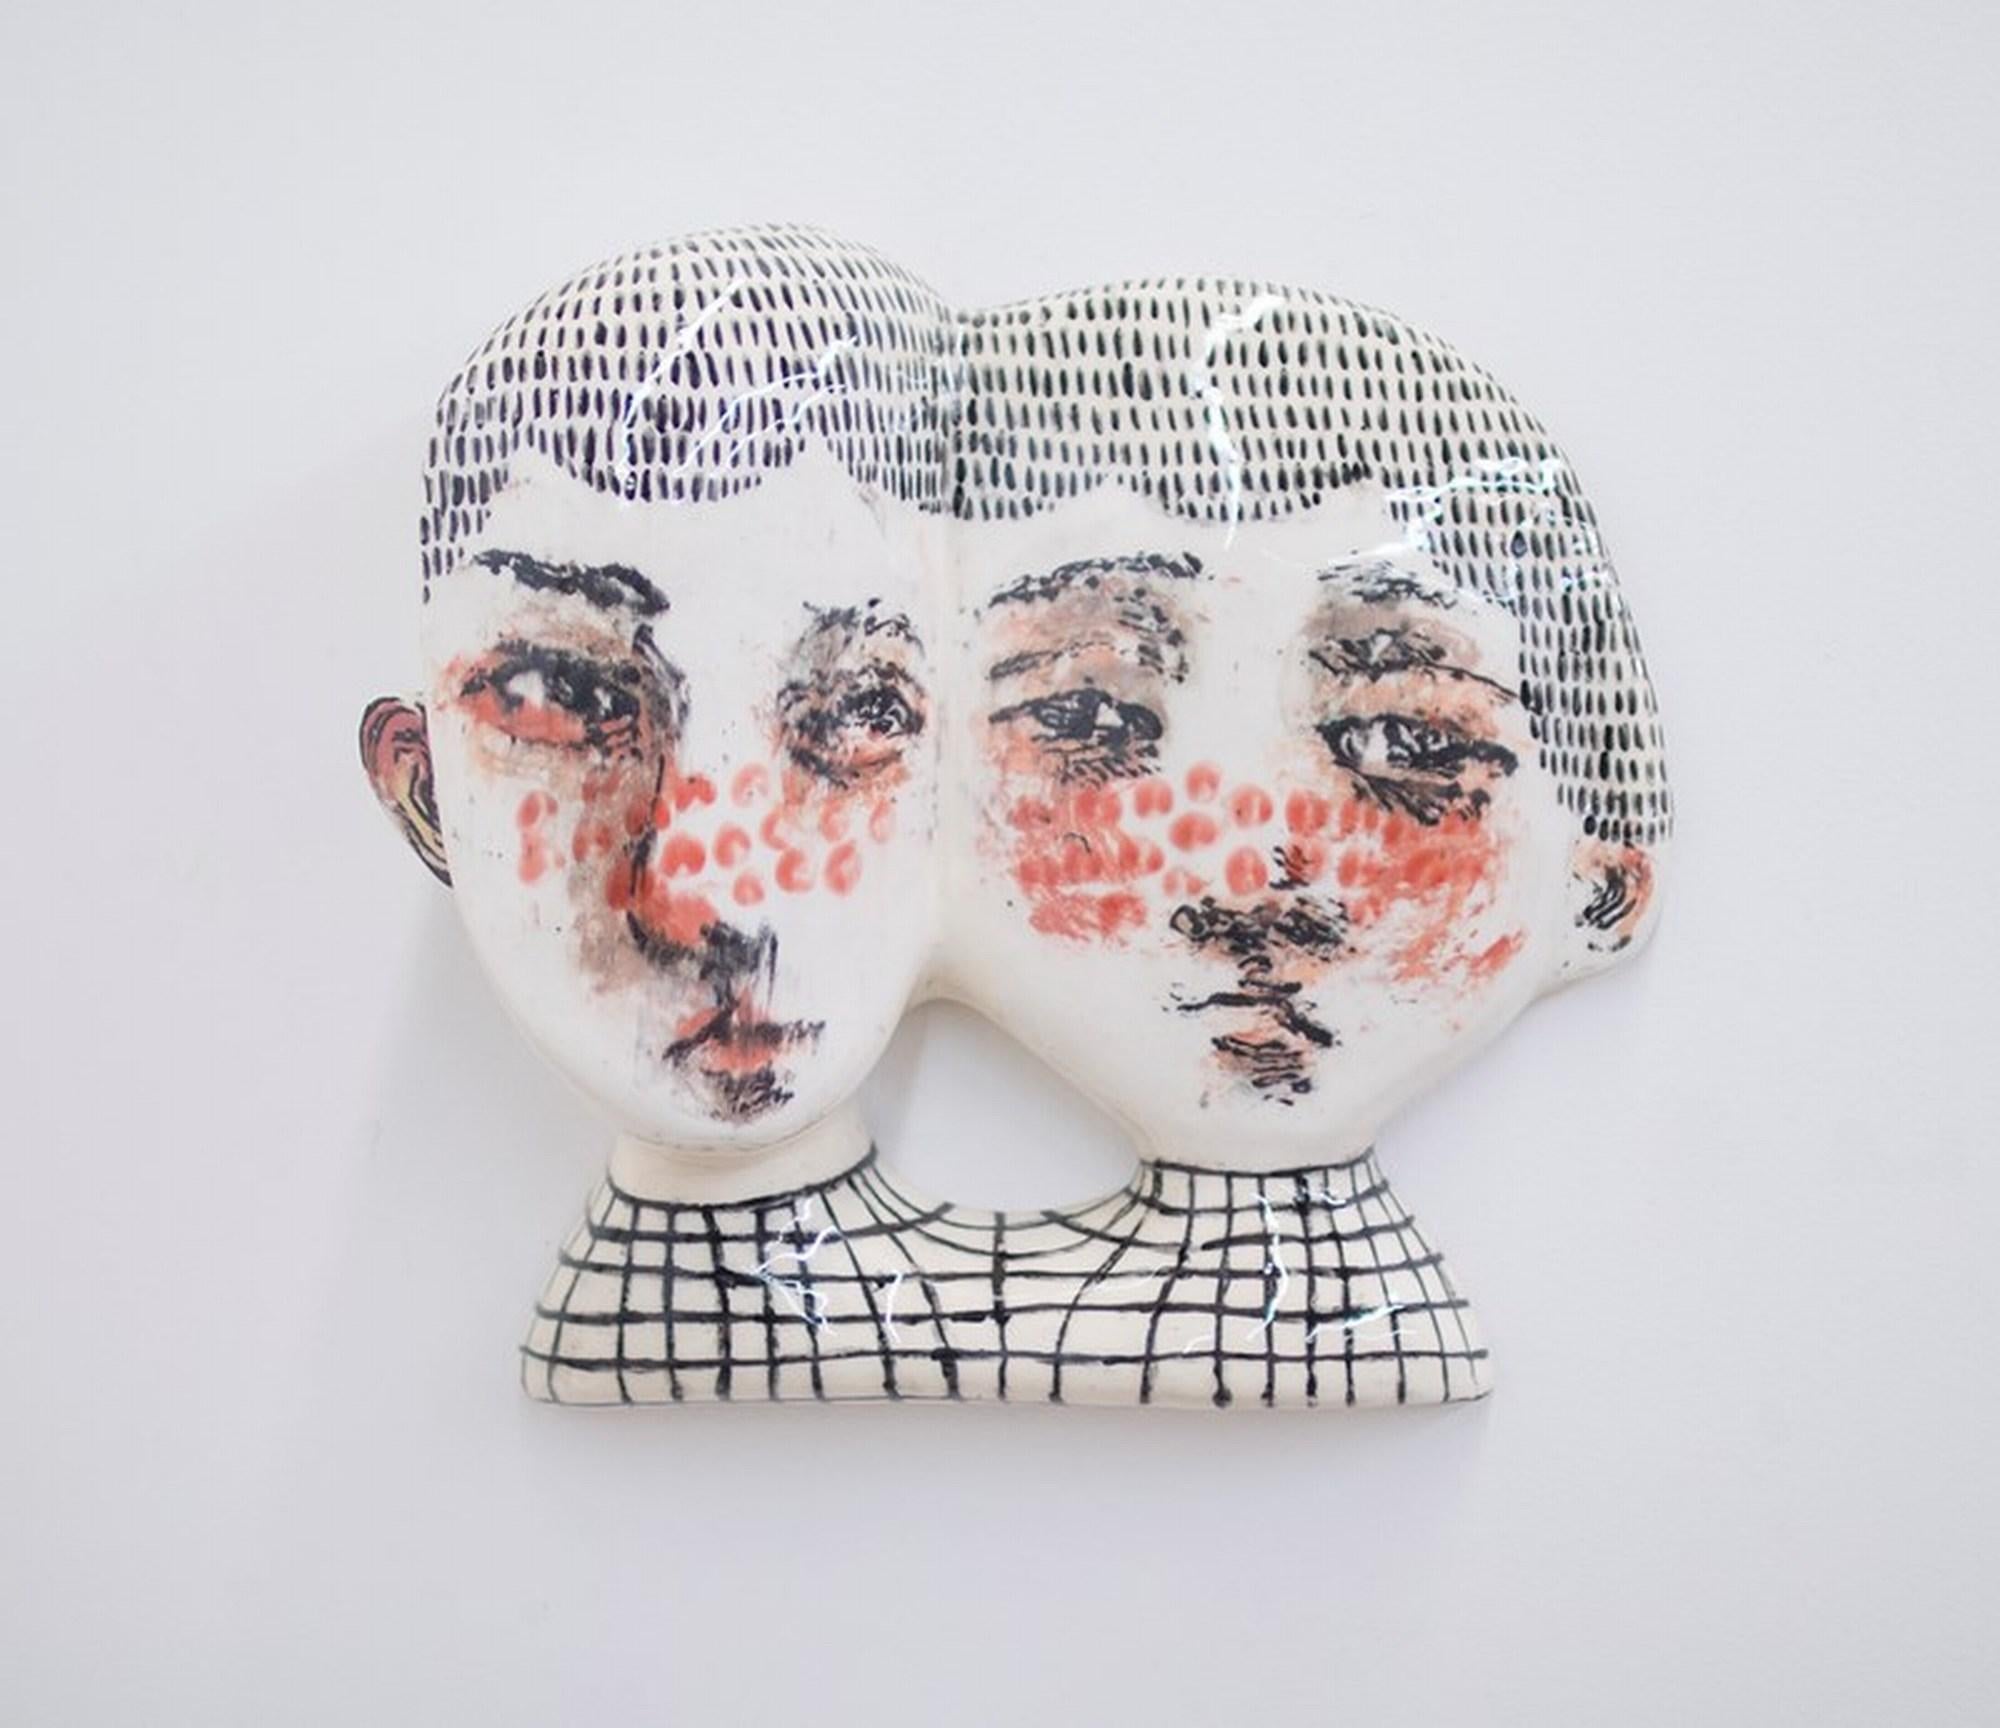 Of Course I'm Always Faithful to You - Sculpture by Soojin Choi